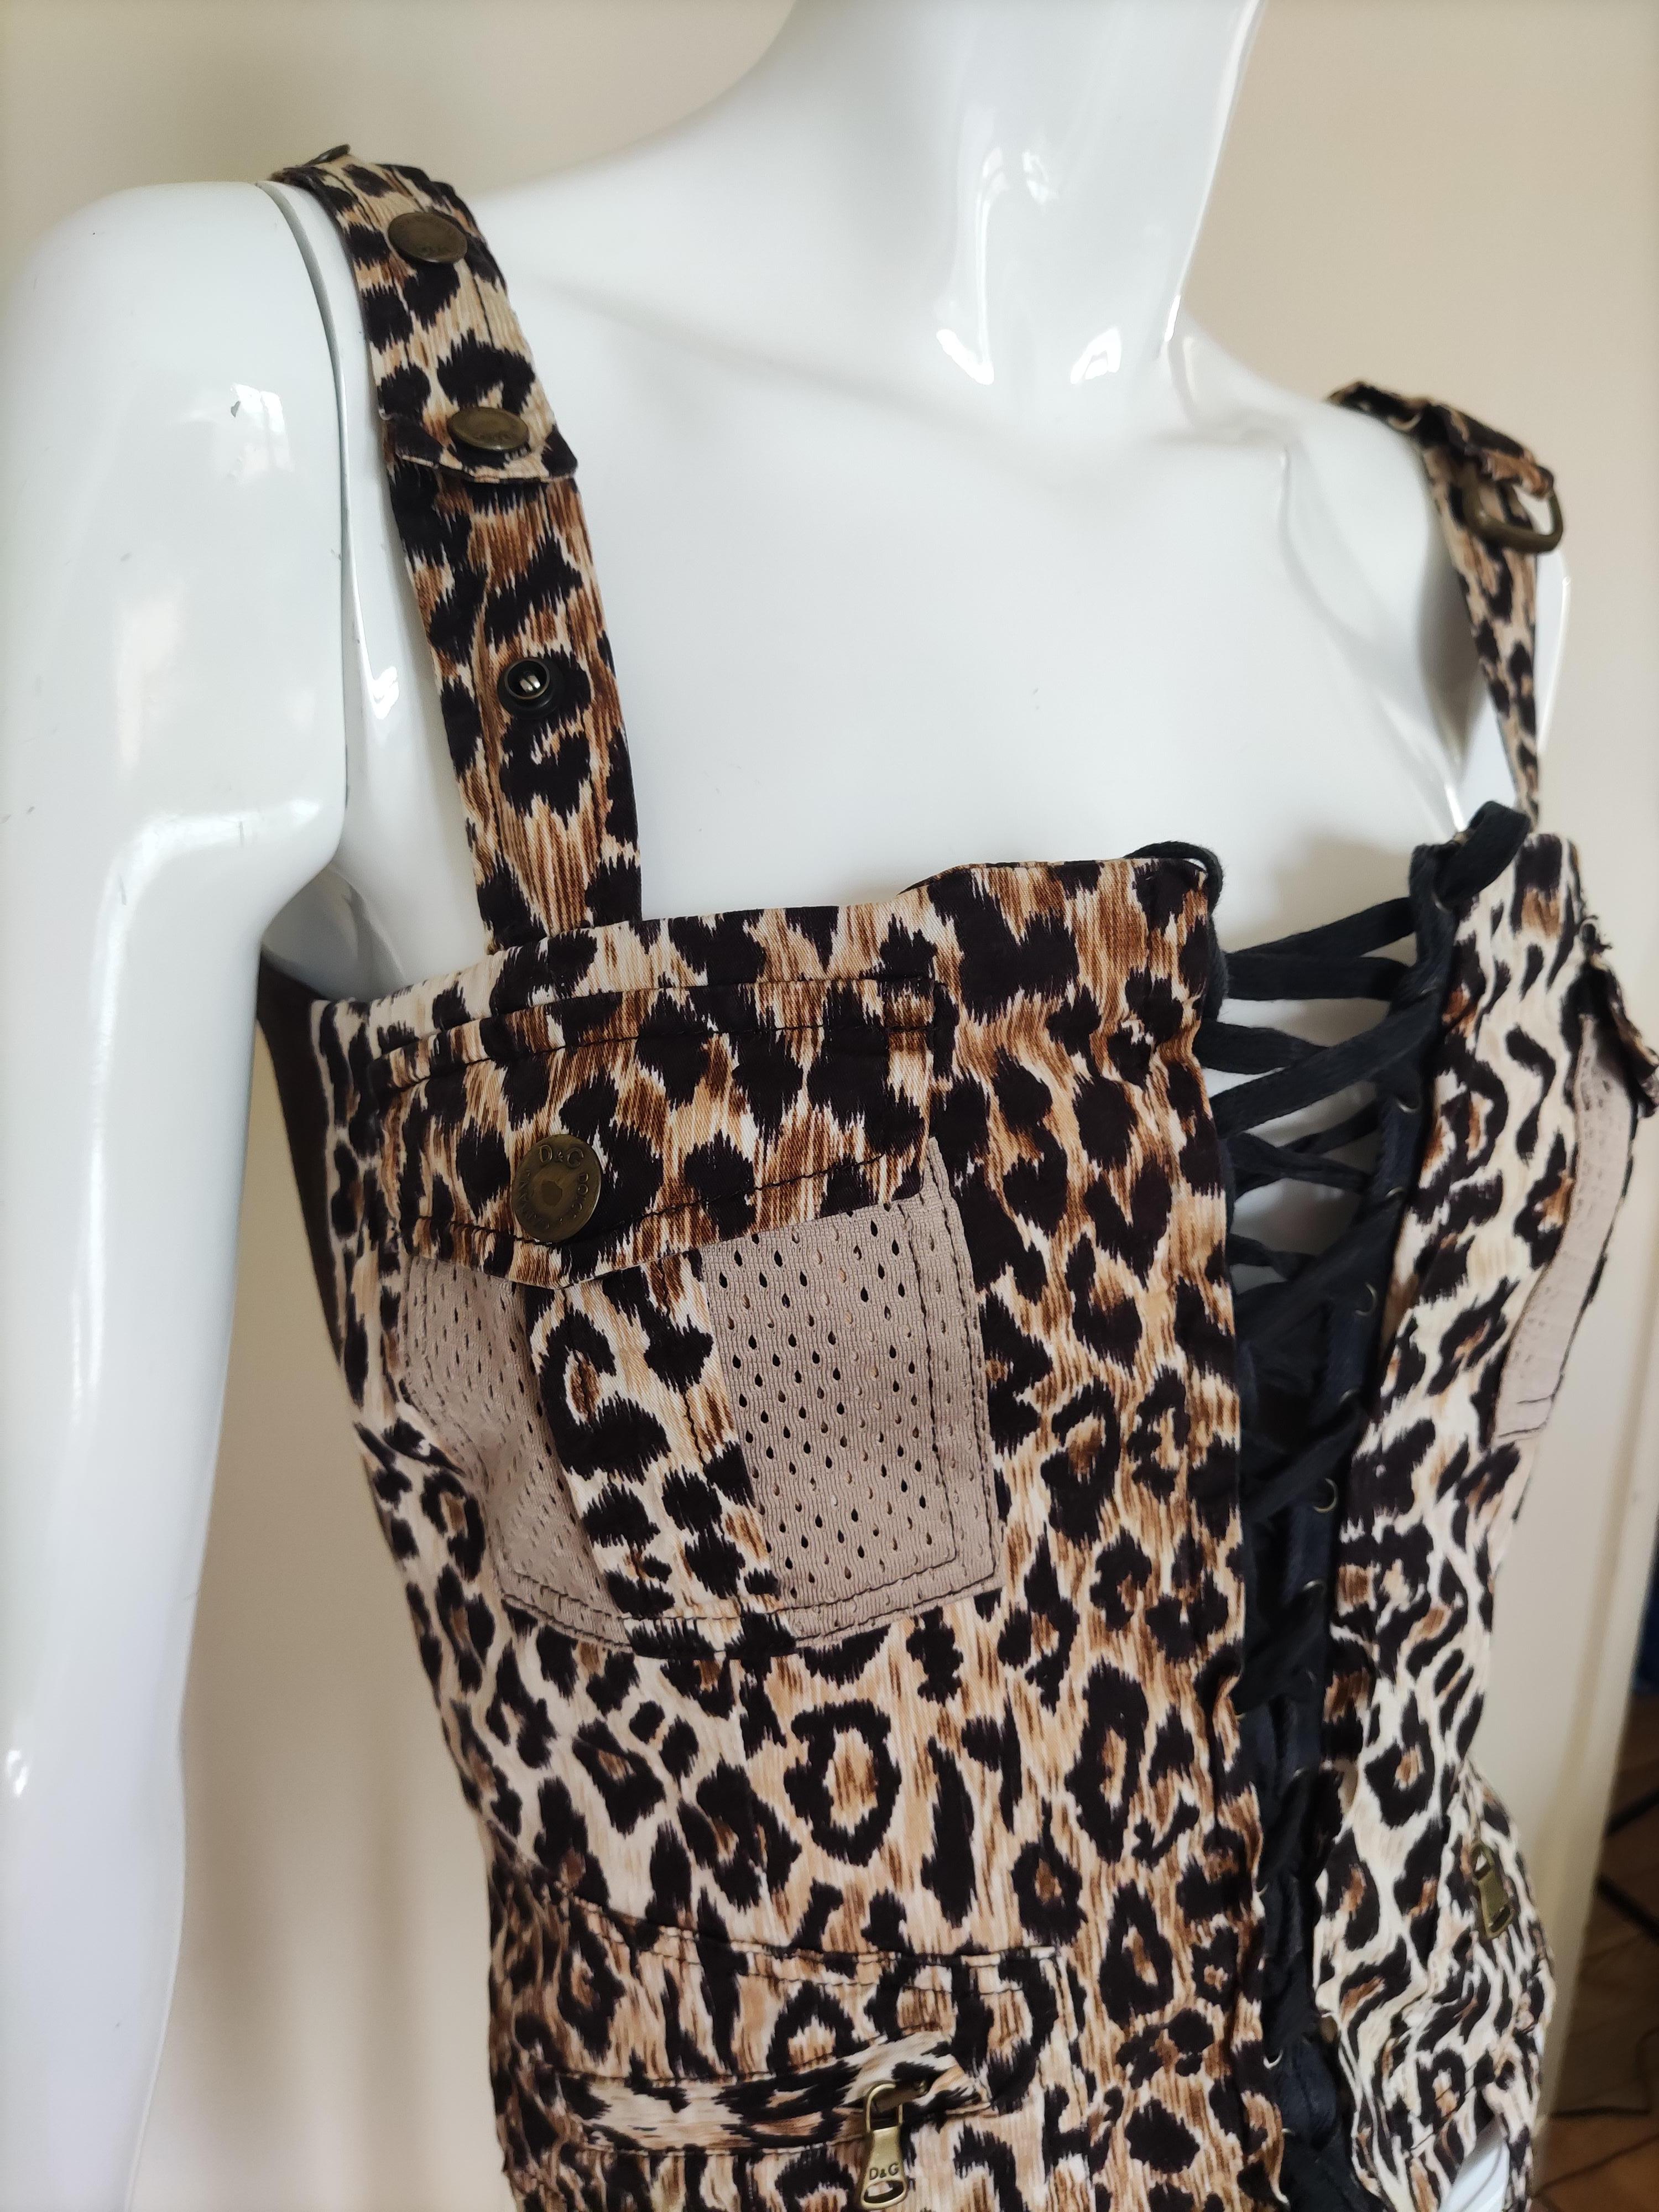 Dolce and Gabbana corset from the 90s!
Cargo style!
4 pockets on the front, 1 pocket on the back!

VERY GOOD condition!

Size: large/XL Marked size: 26/40.
Please, note, the corset was adjusted by clips on the mannquein to make it fit for its size.